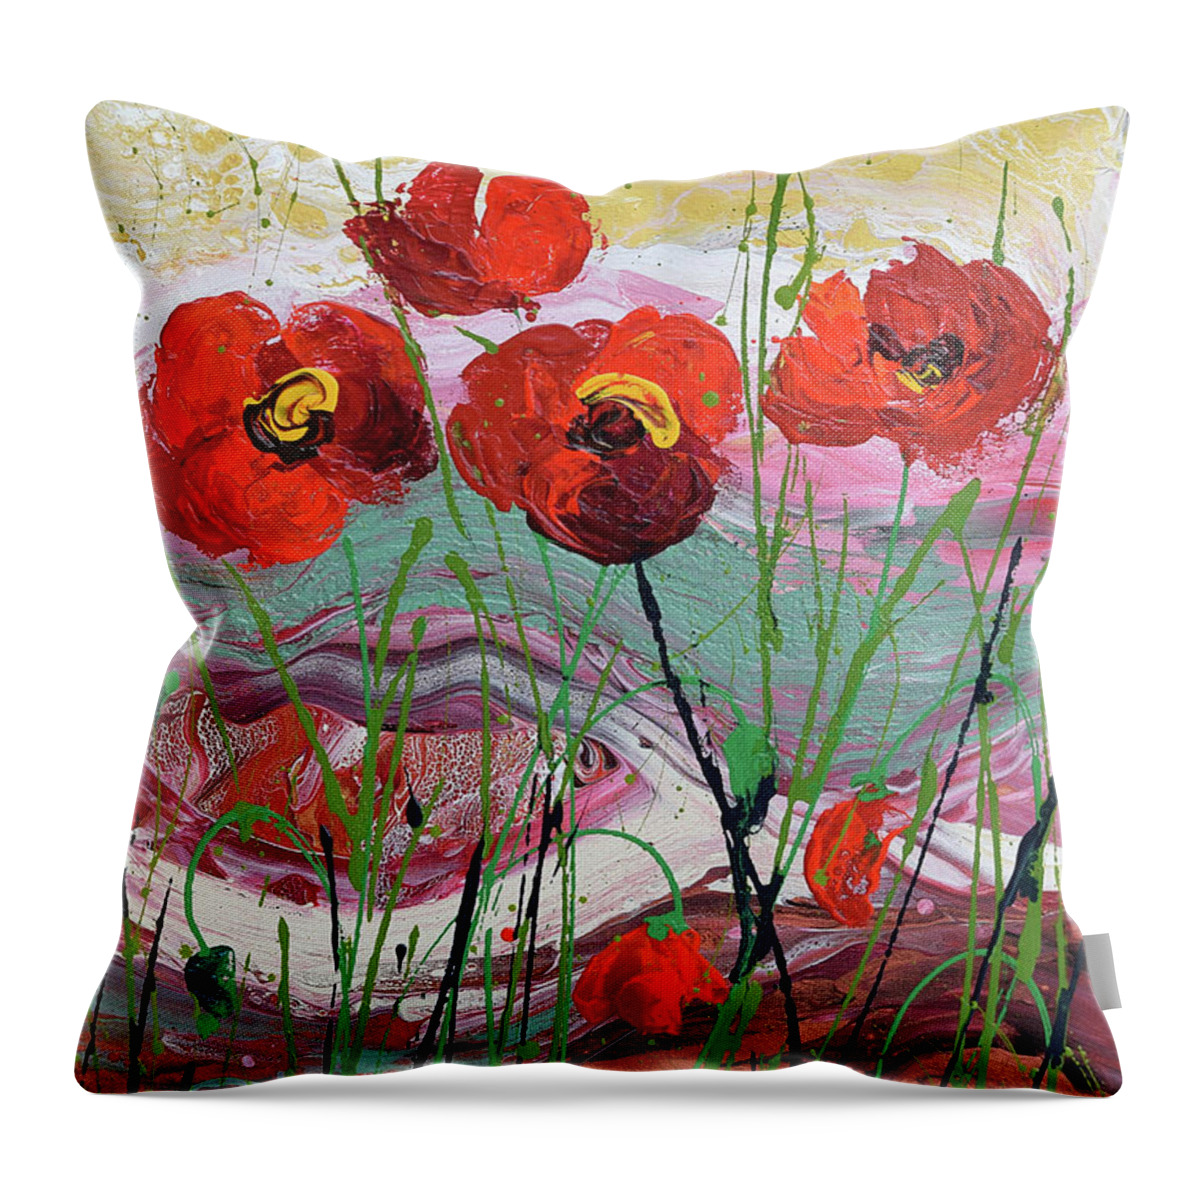 Wild Poppies - Triptych Throw Pillow featuring the painting Wild Poppies - 3 by Jyotika Shroff